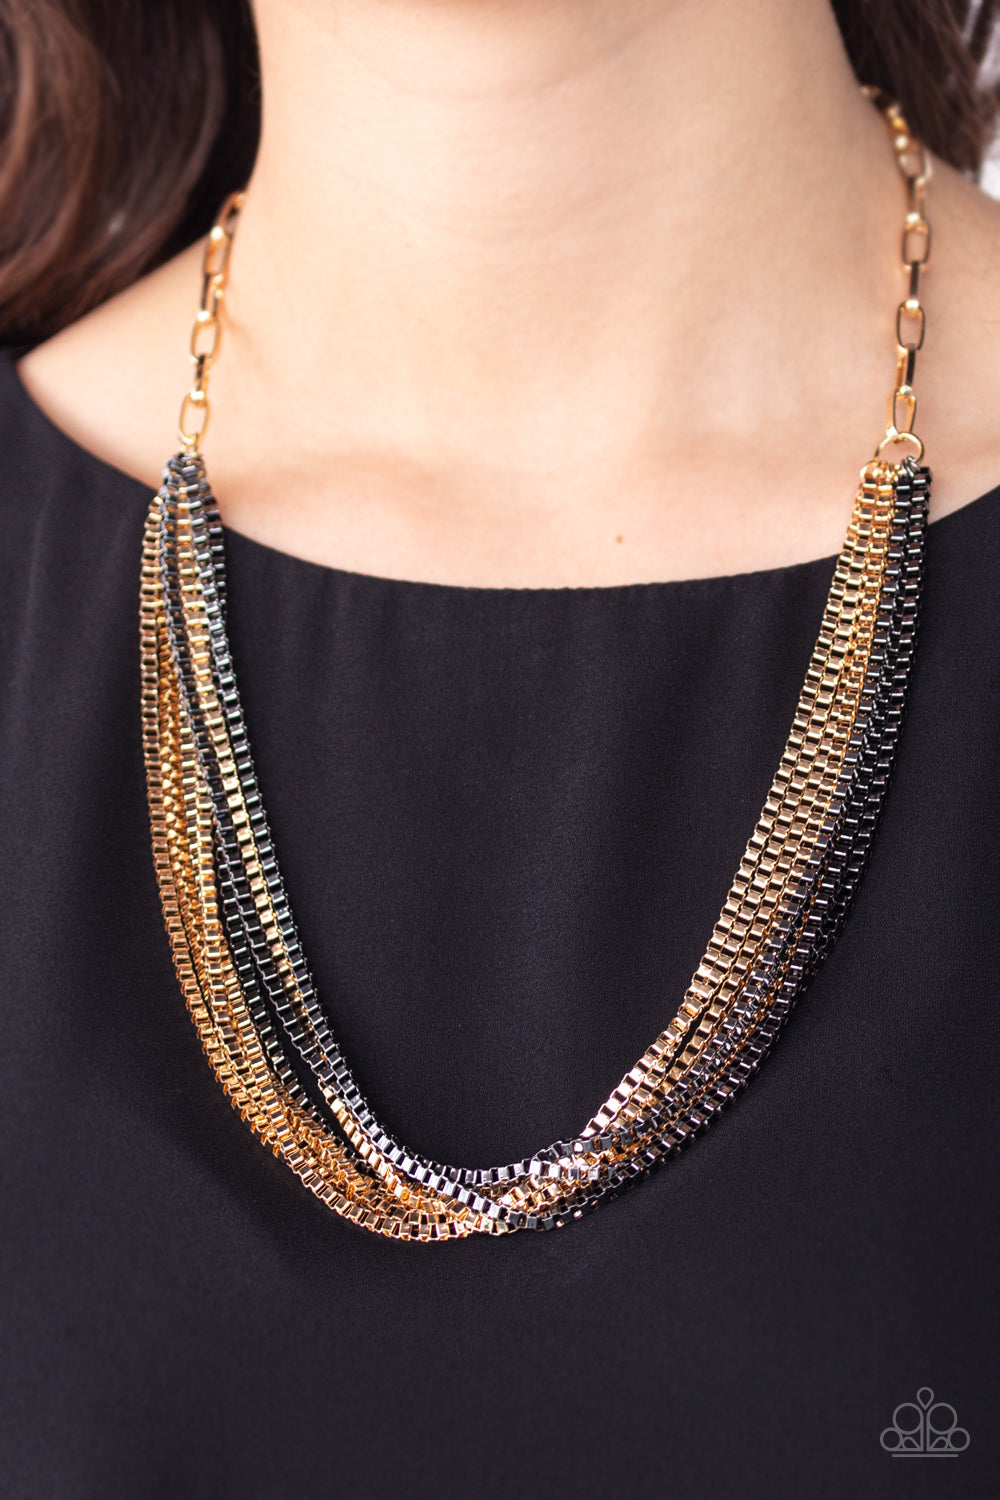 Paparazzi Necklace ~ Beat Box Queen - Gold Necklace